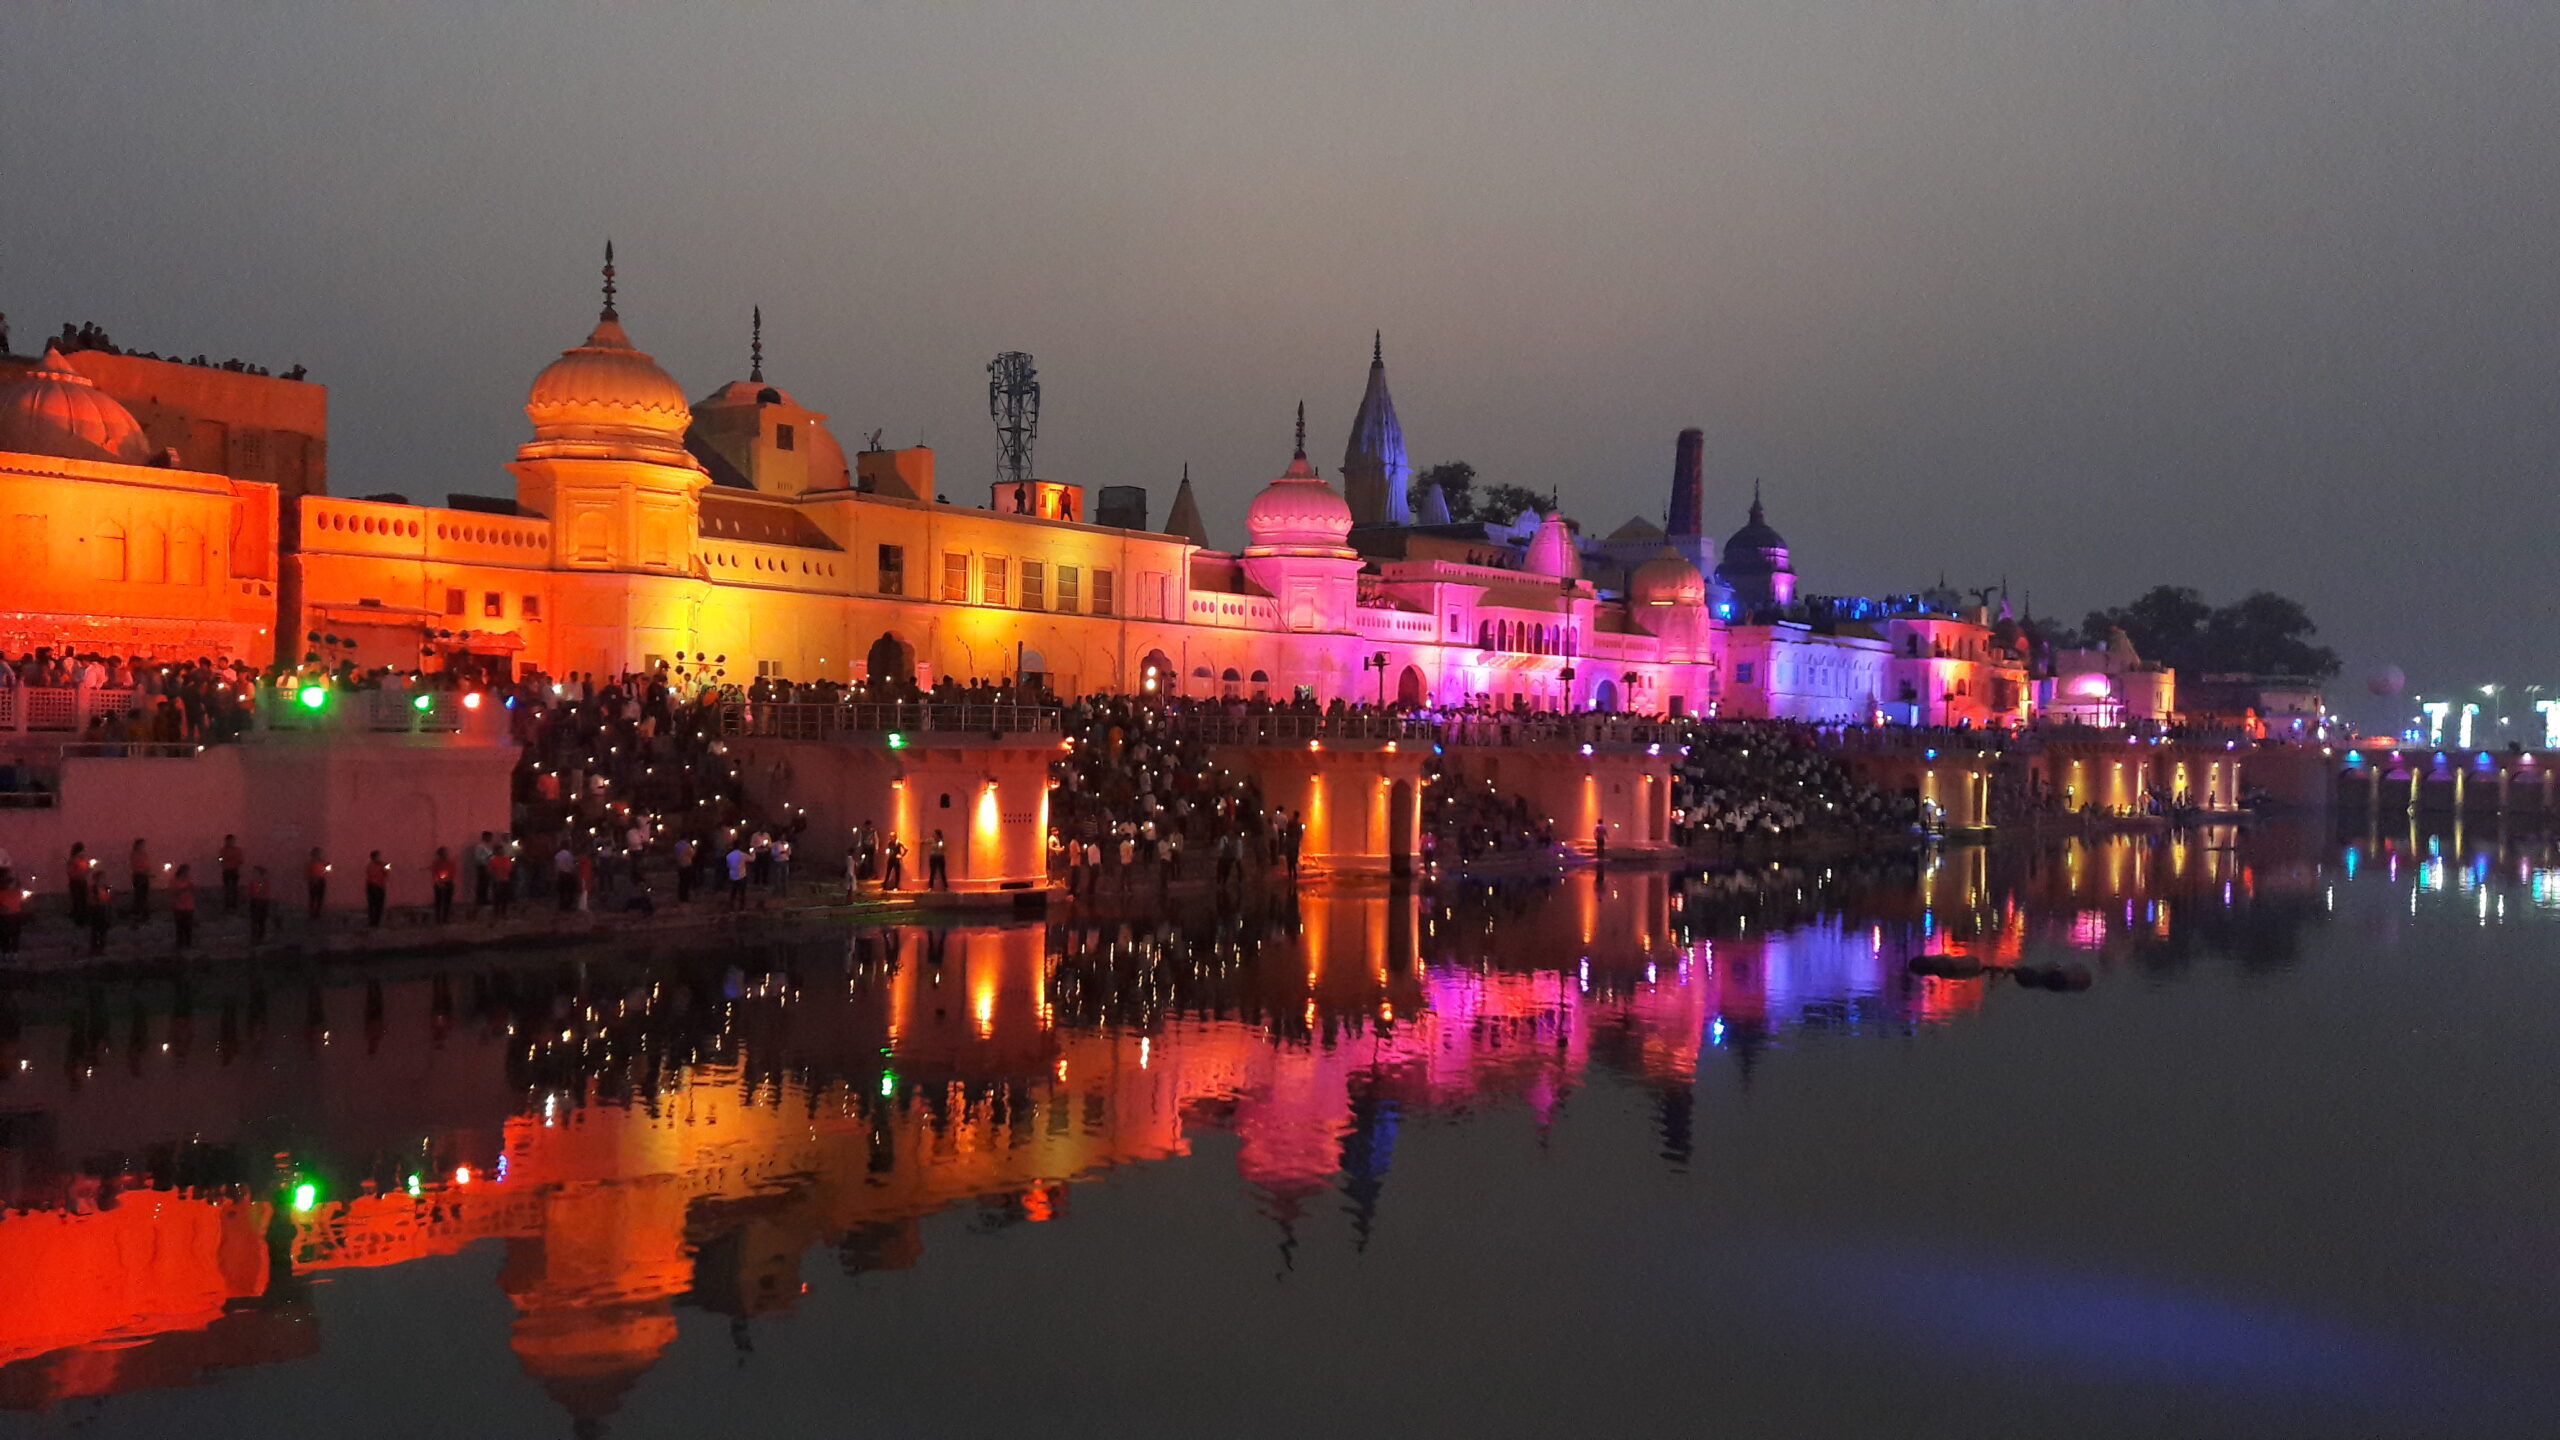 Ayodhya Haat will be another attraction in temple town